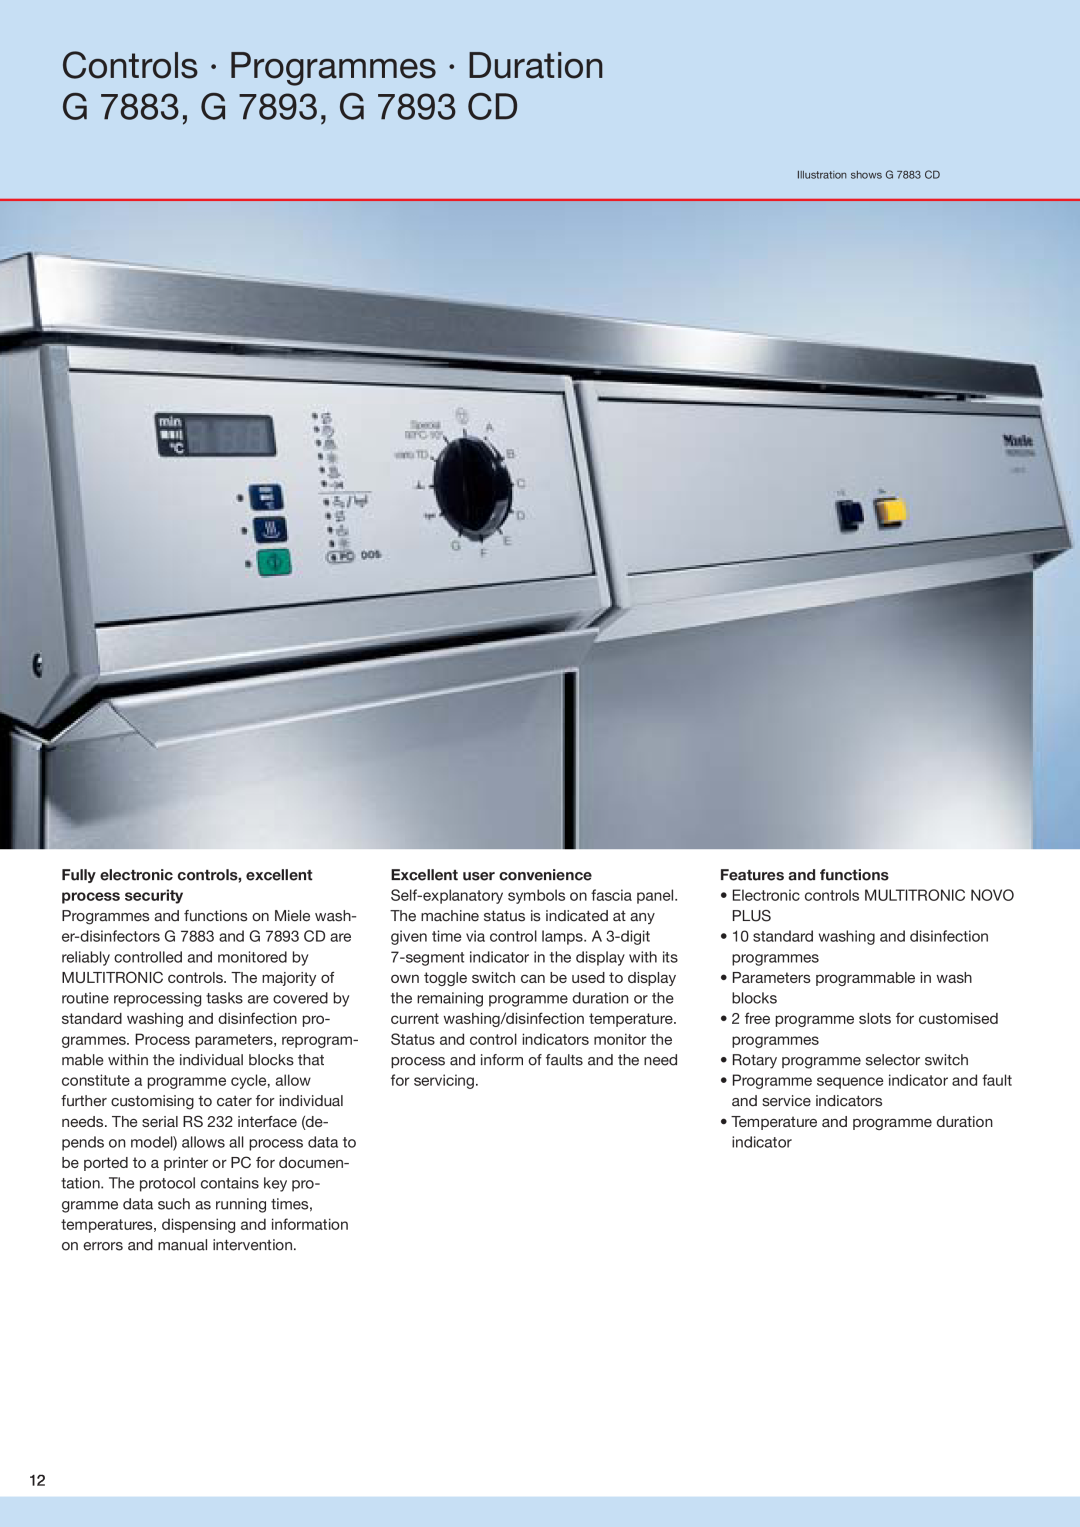 Miele Controls · Programmes · Duration, G 7883, G 7893, G 7893 CD, Excellent user convenience, Features and functions 